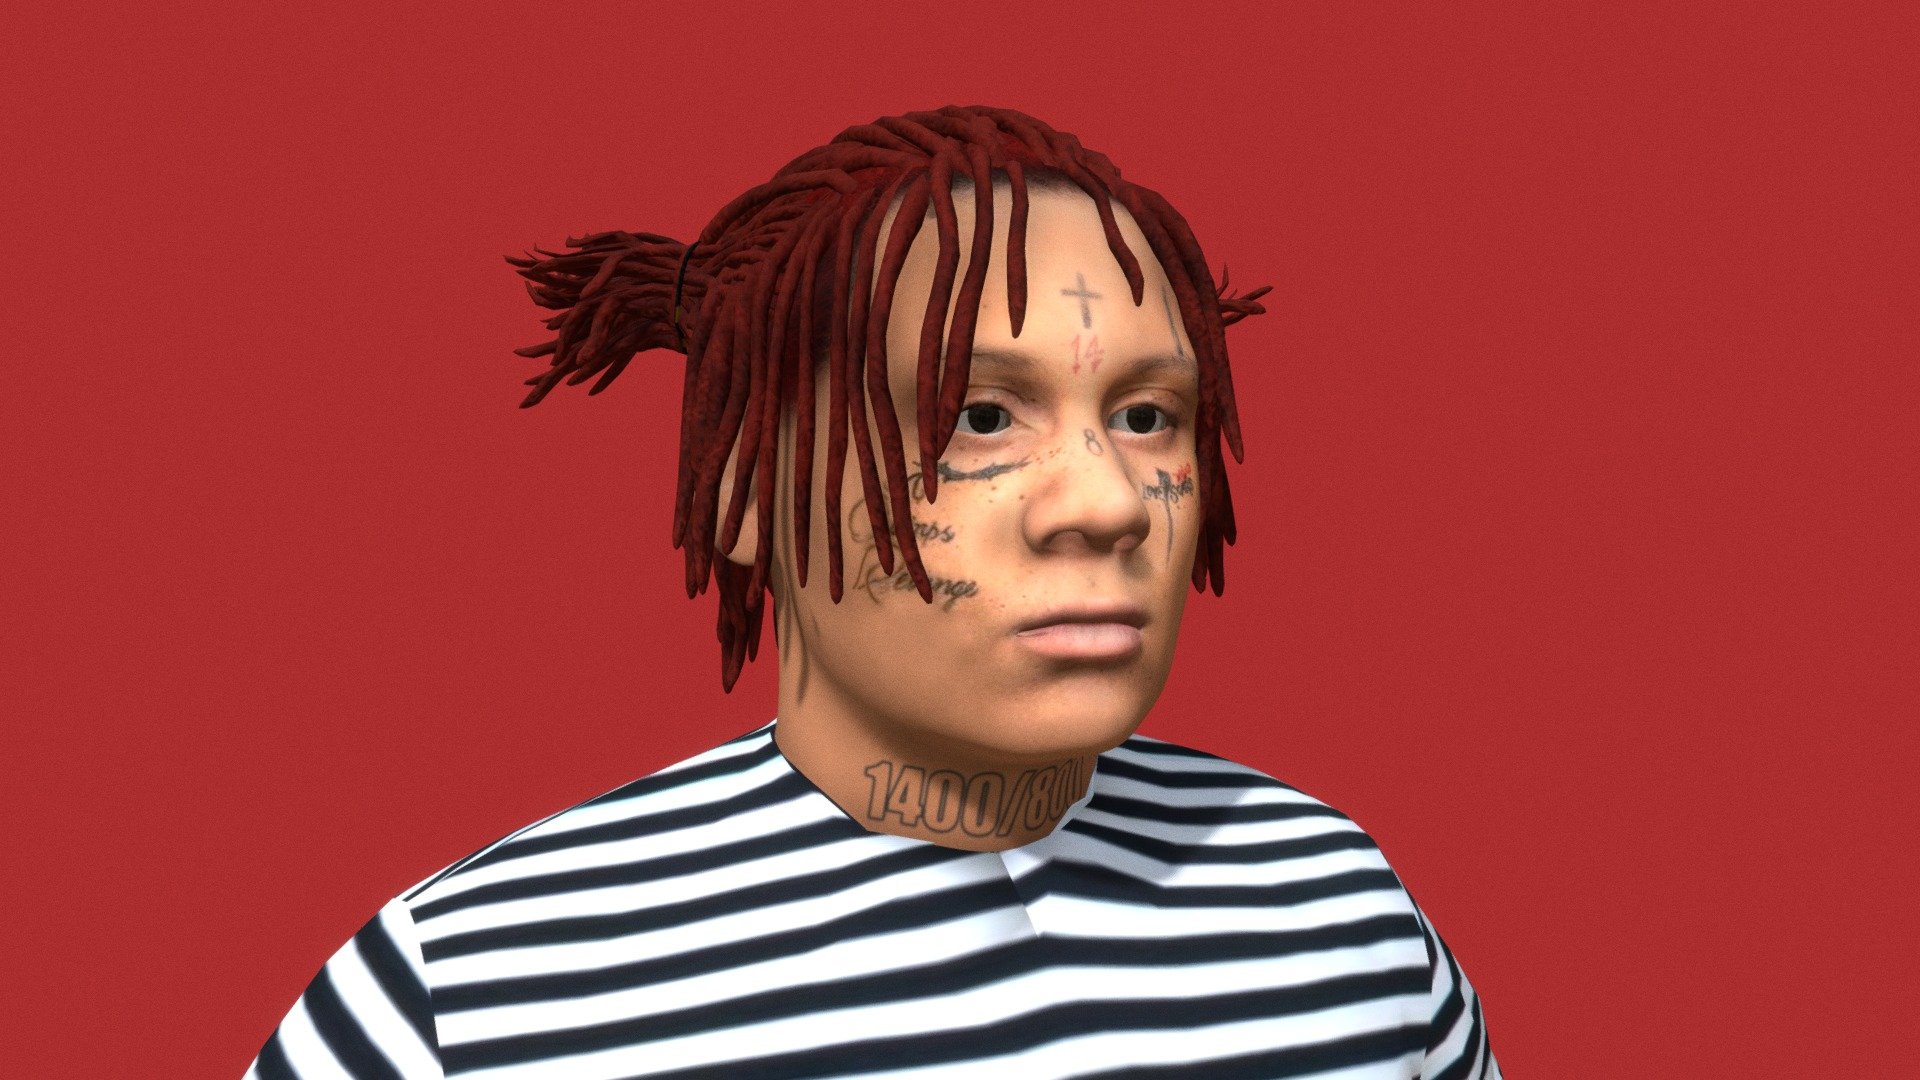 Michael Lamar White II, known professionally as Trippie Redd, is an American rapper, singer, and songwriter. He is one of the most prominent members of the SoundCloud rap scene, which gained mainstream acclaim in the late 2010s. His debut mixtape, A Love Letter to You (2017), and its lead single, &ldquo;Love Scars